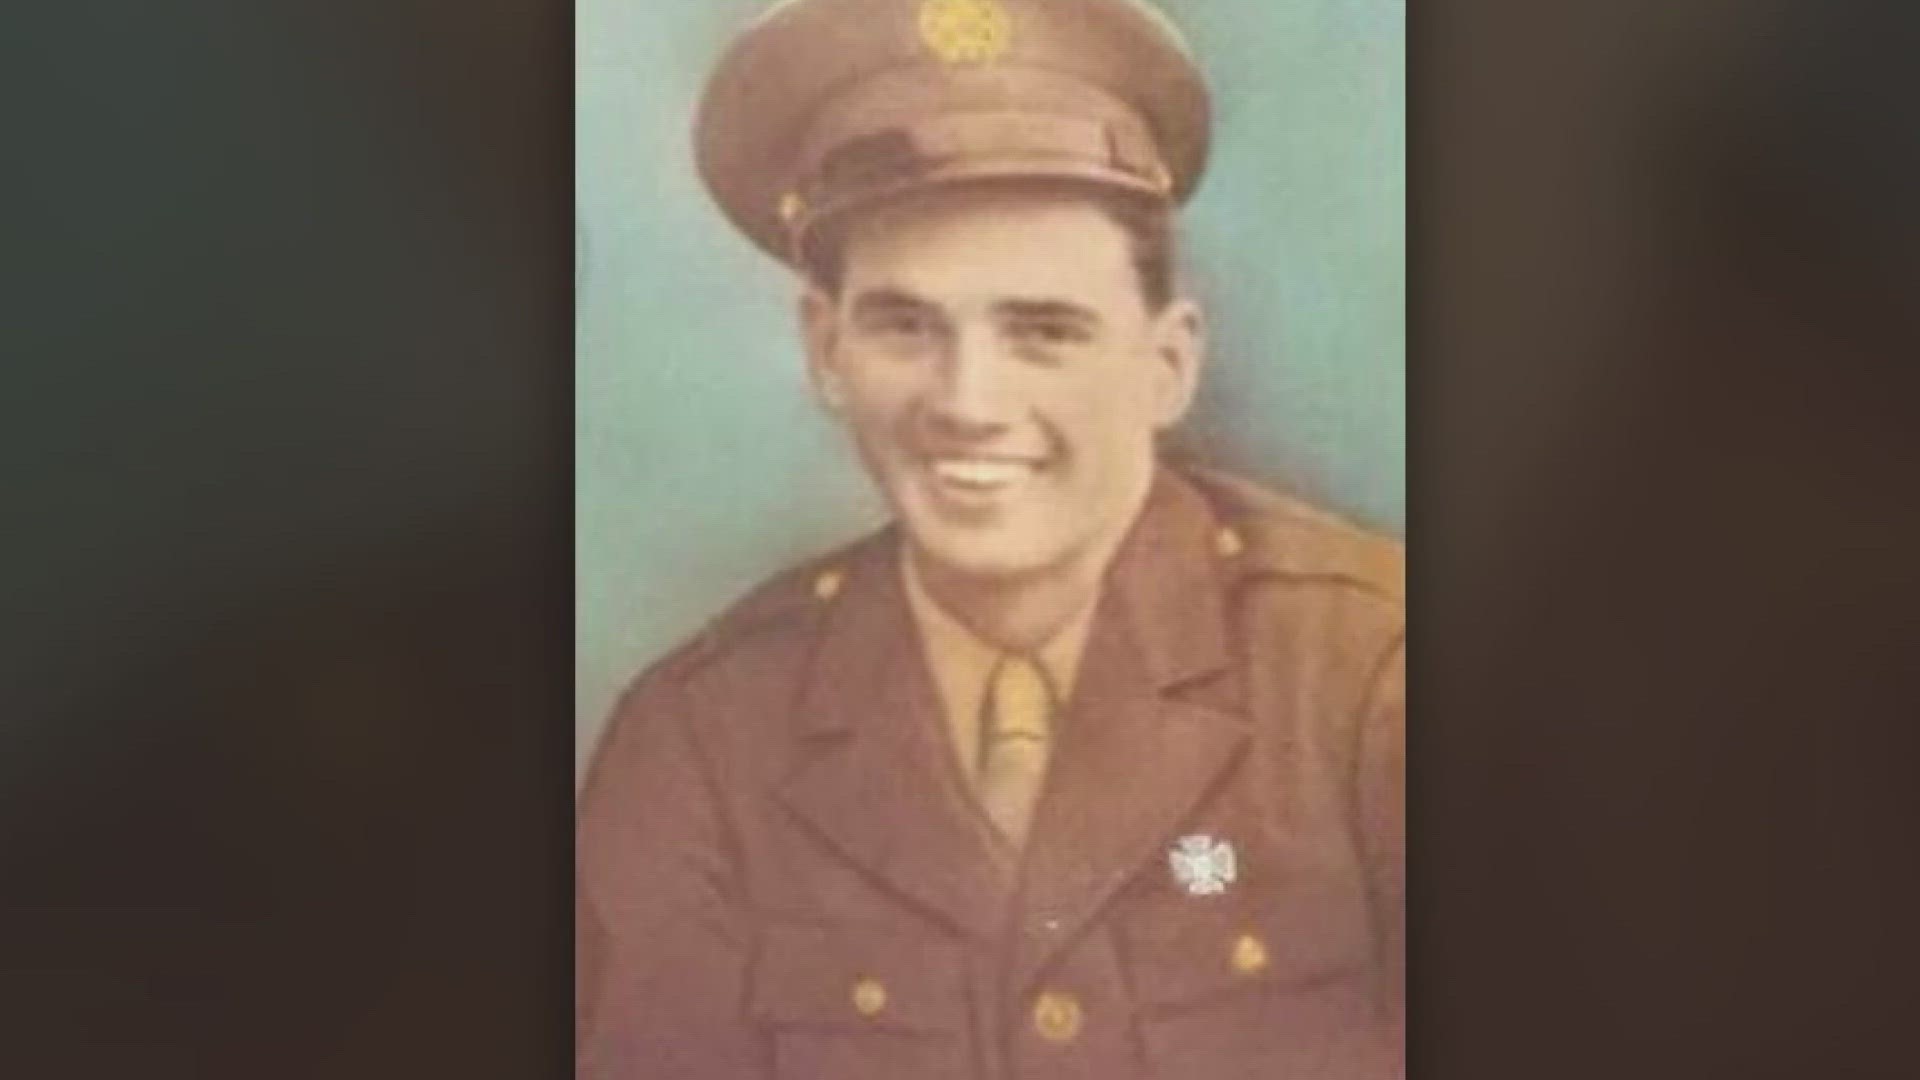 Joe Vinyard died in December 1944. For years his limited remains went unidentified. DNA testing changed that.